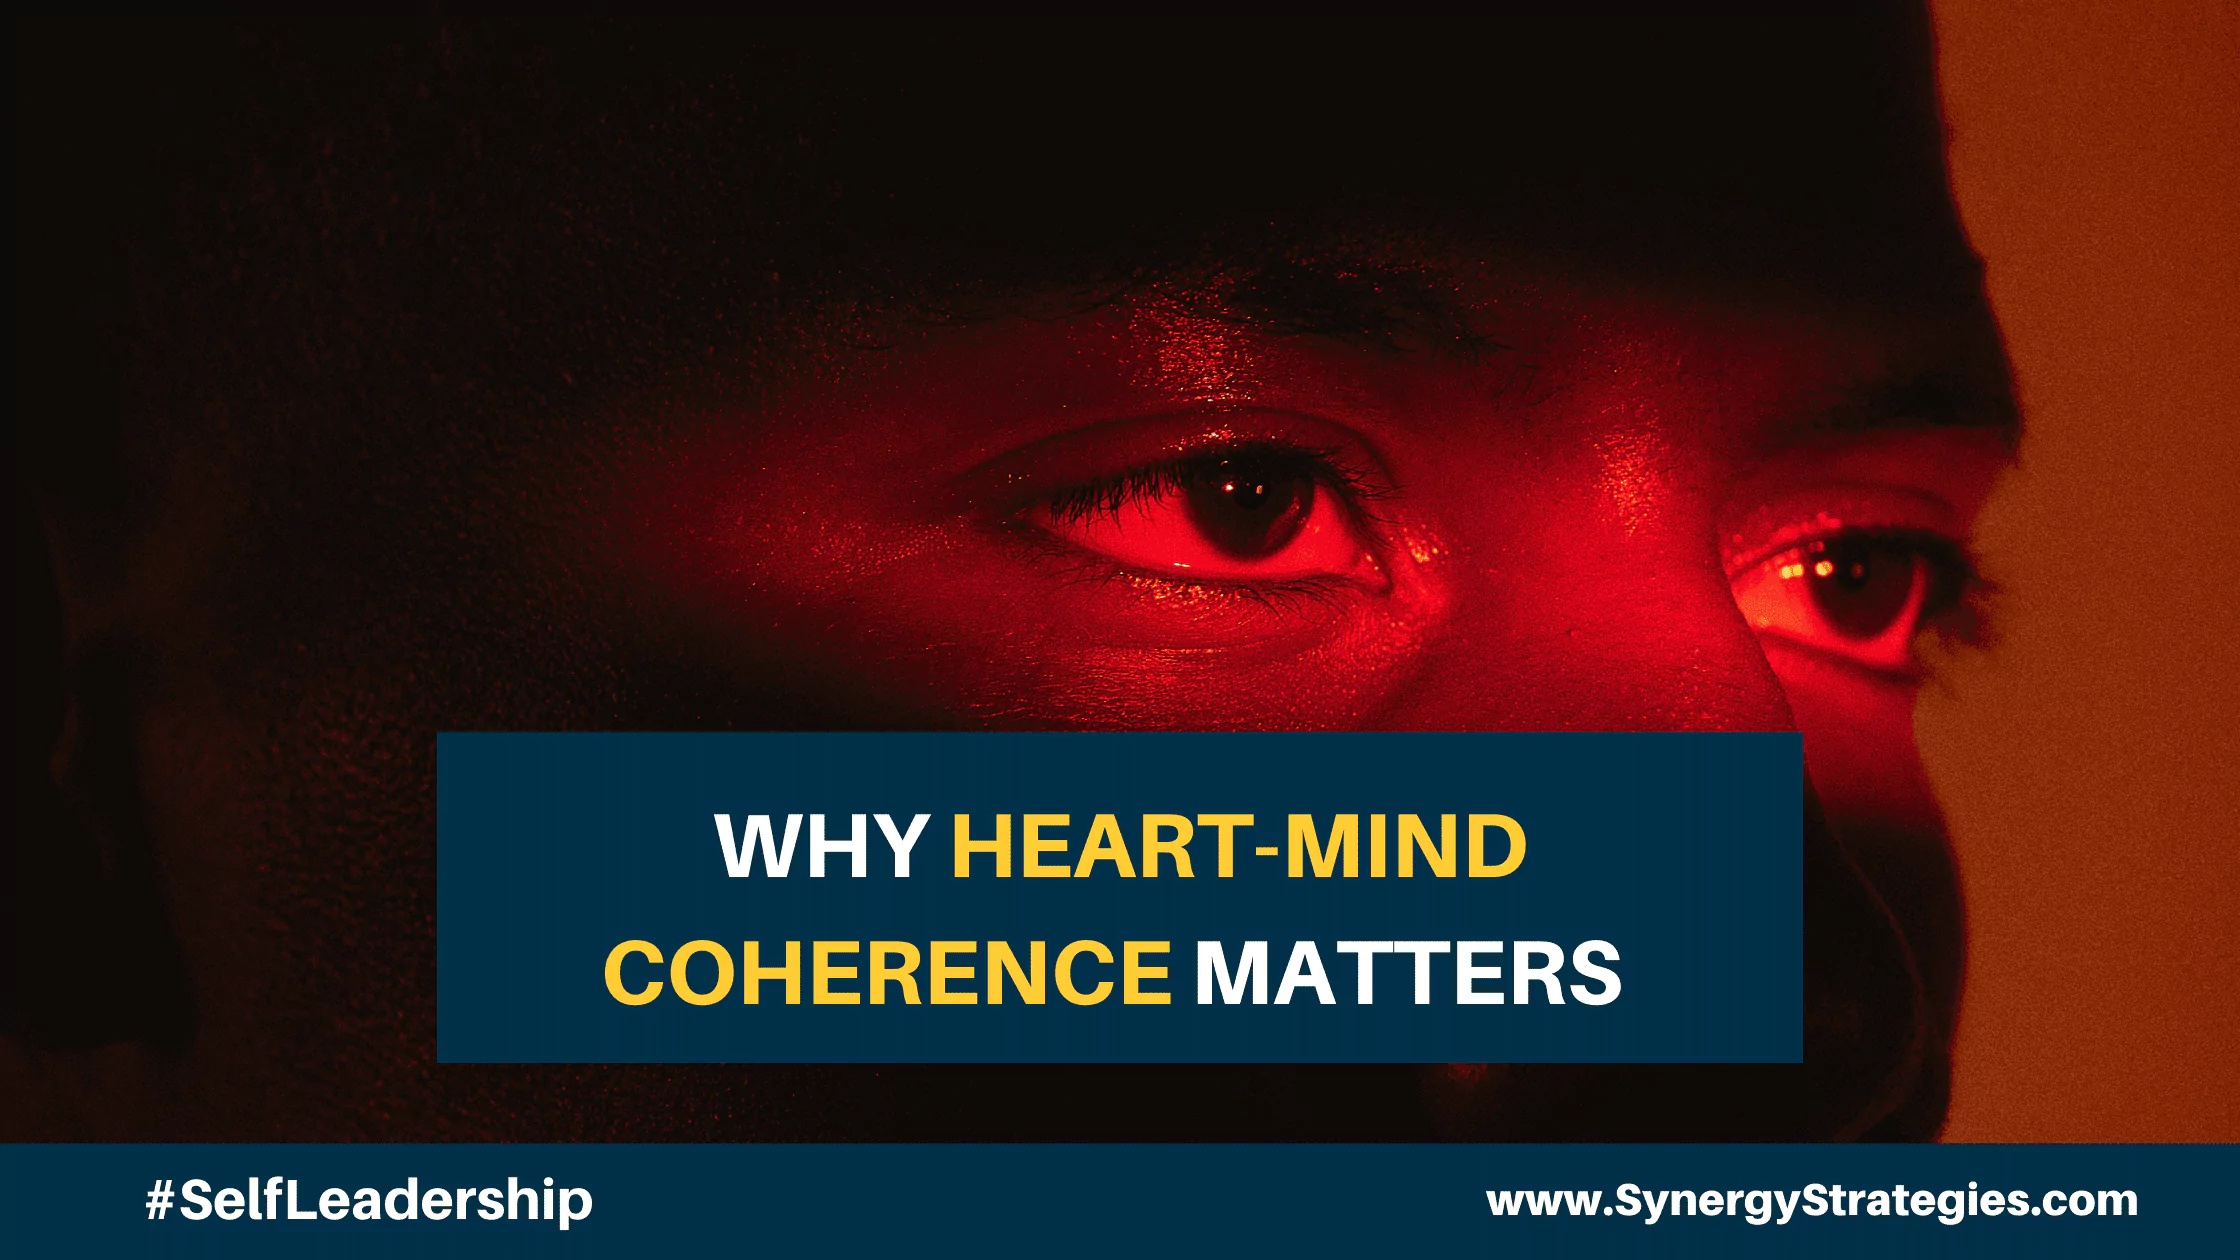 WHY HEART-MIND COHERENCE MATTERS